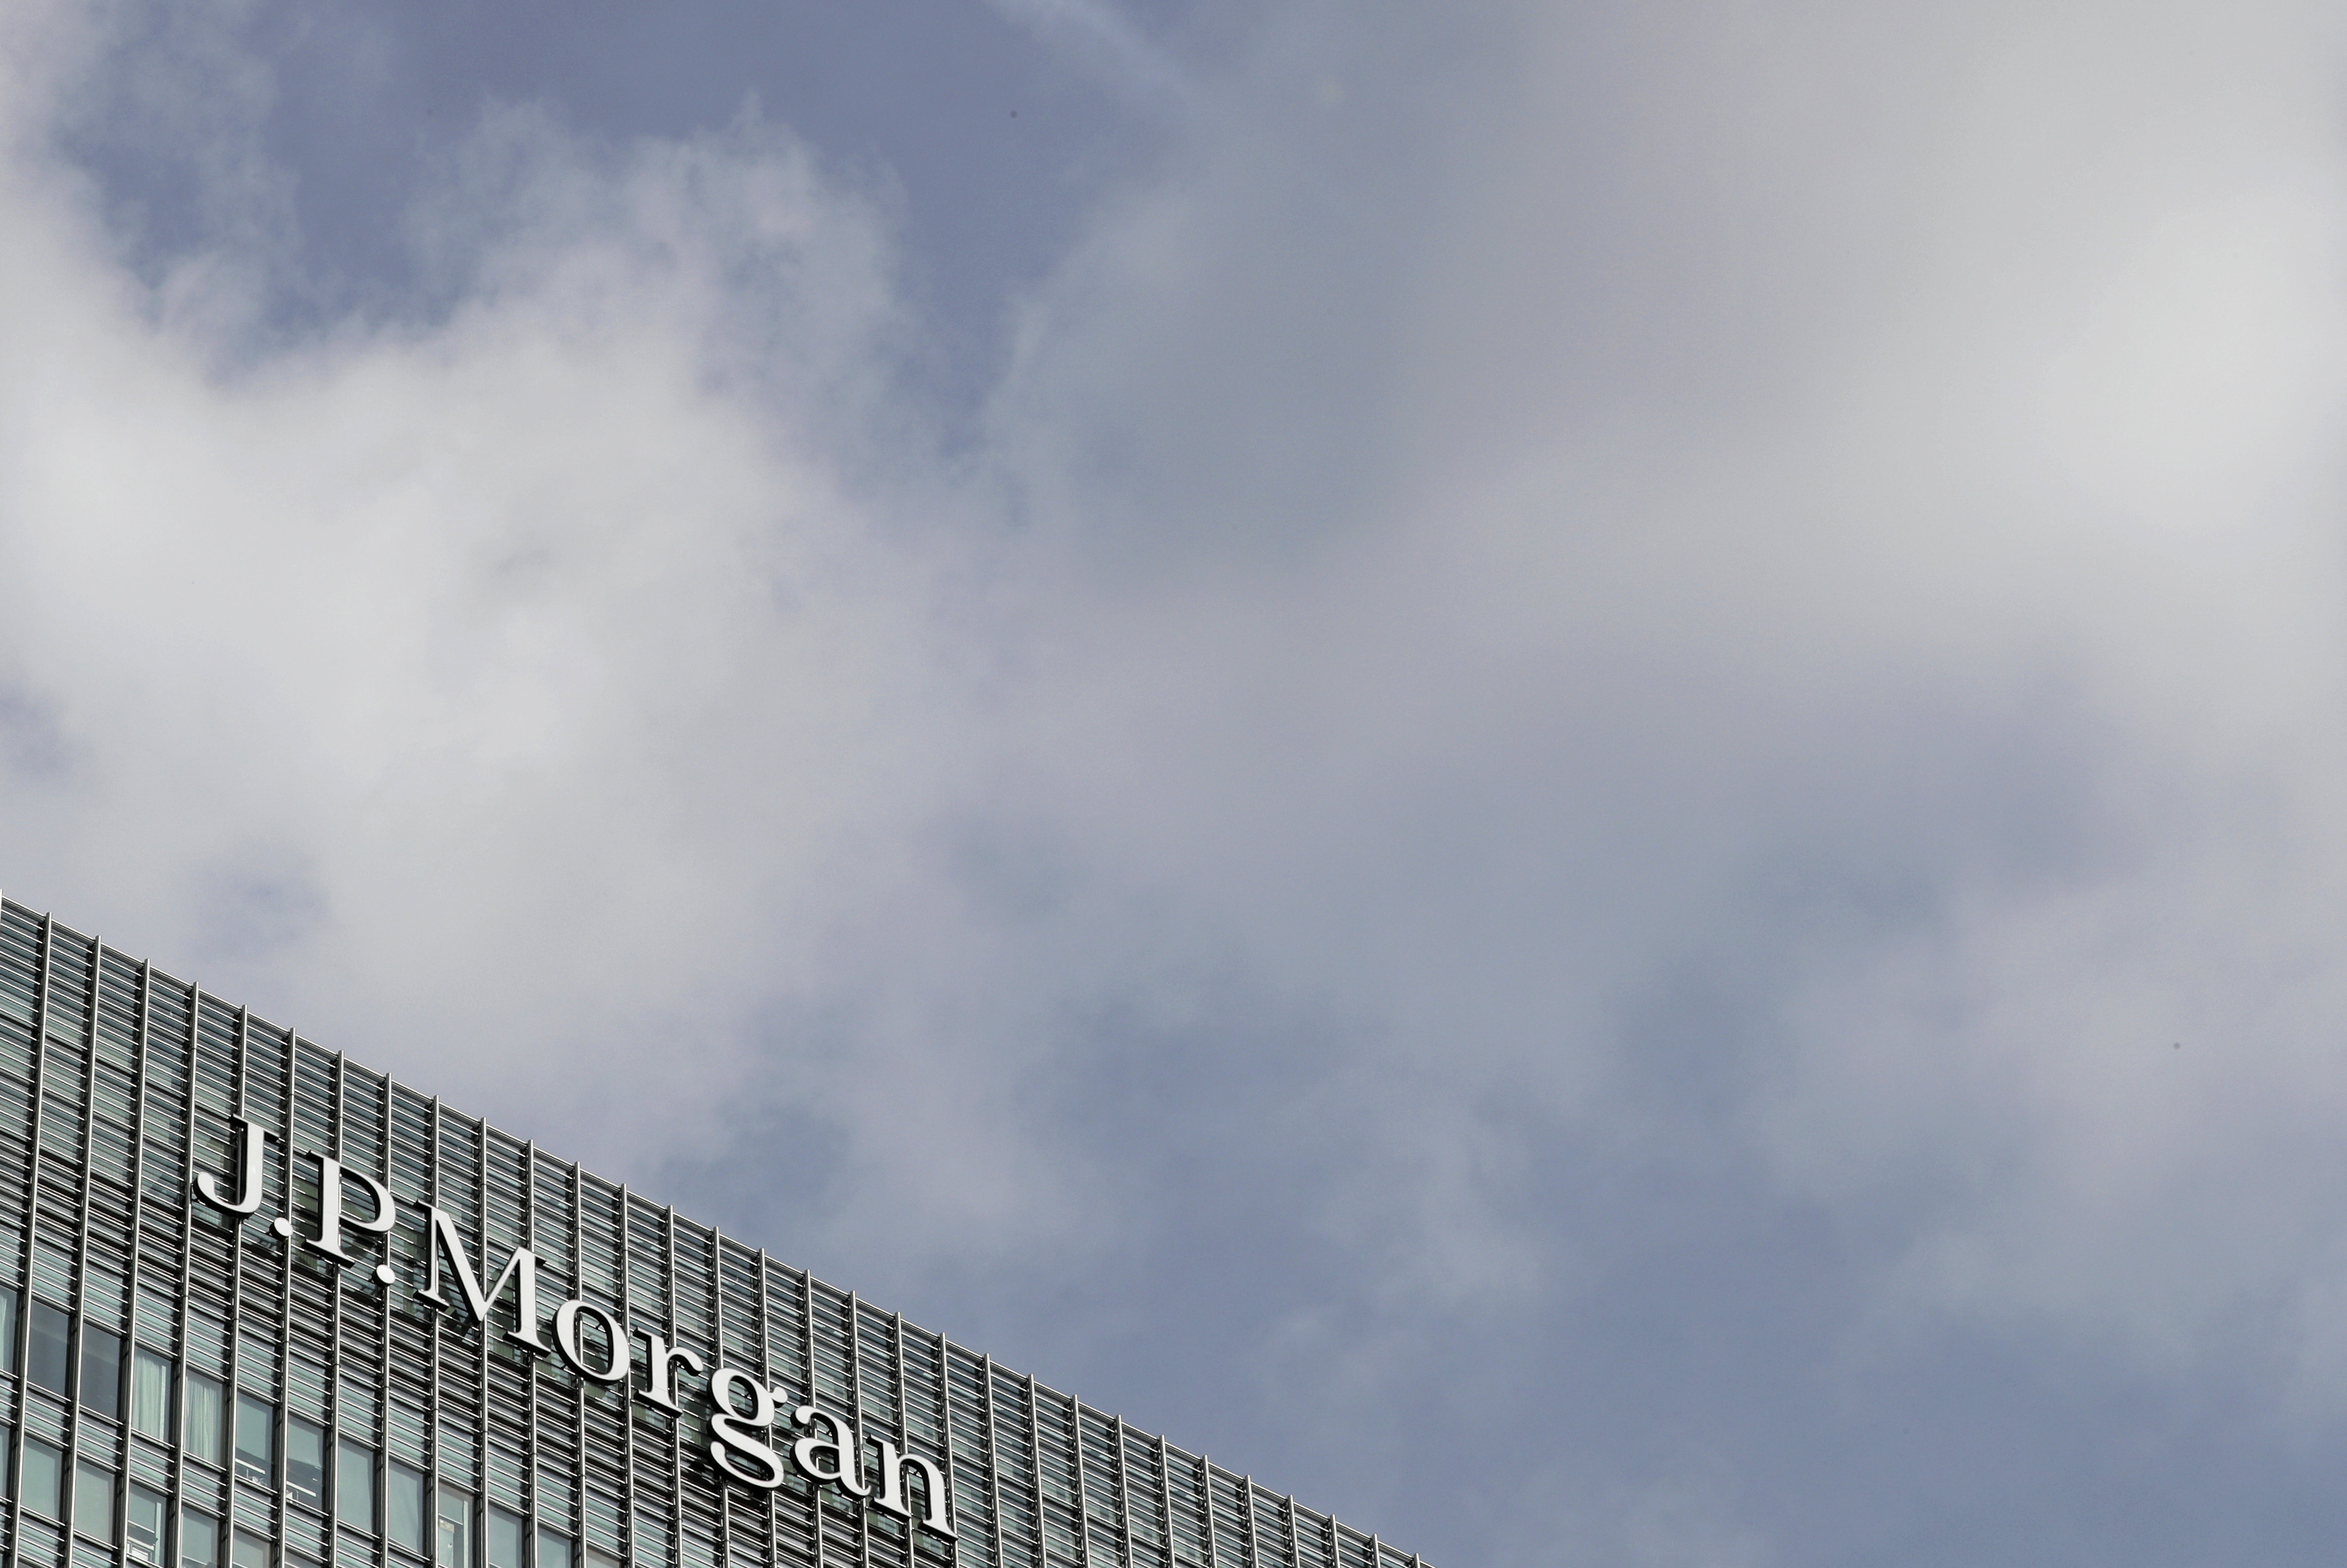 The J.P. Morgan logo is seen at their offices at Canary Wharf financial district in London